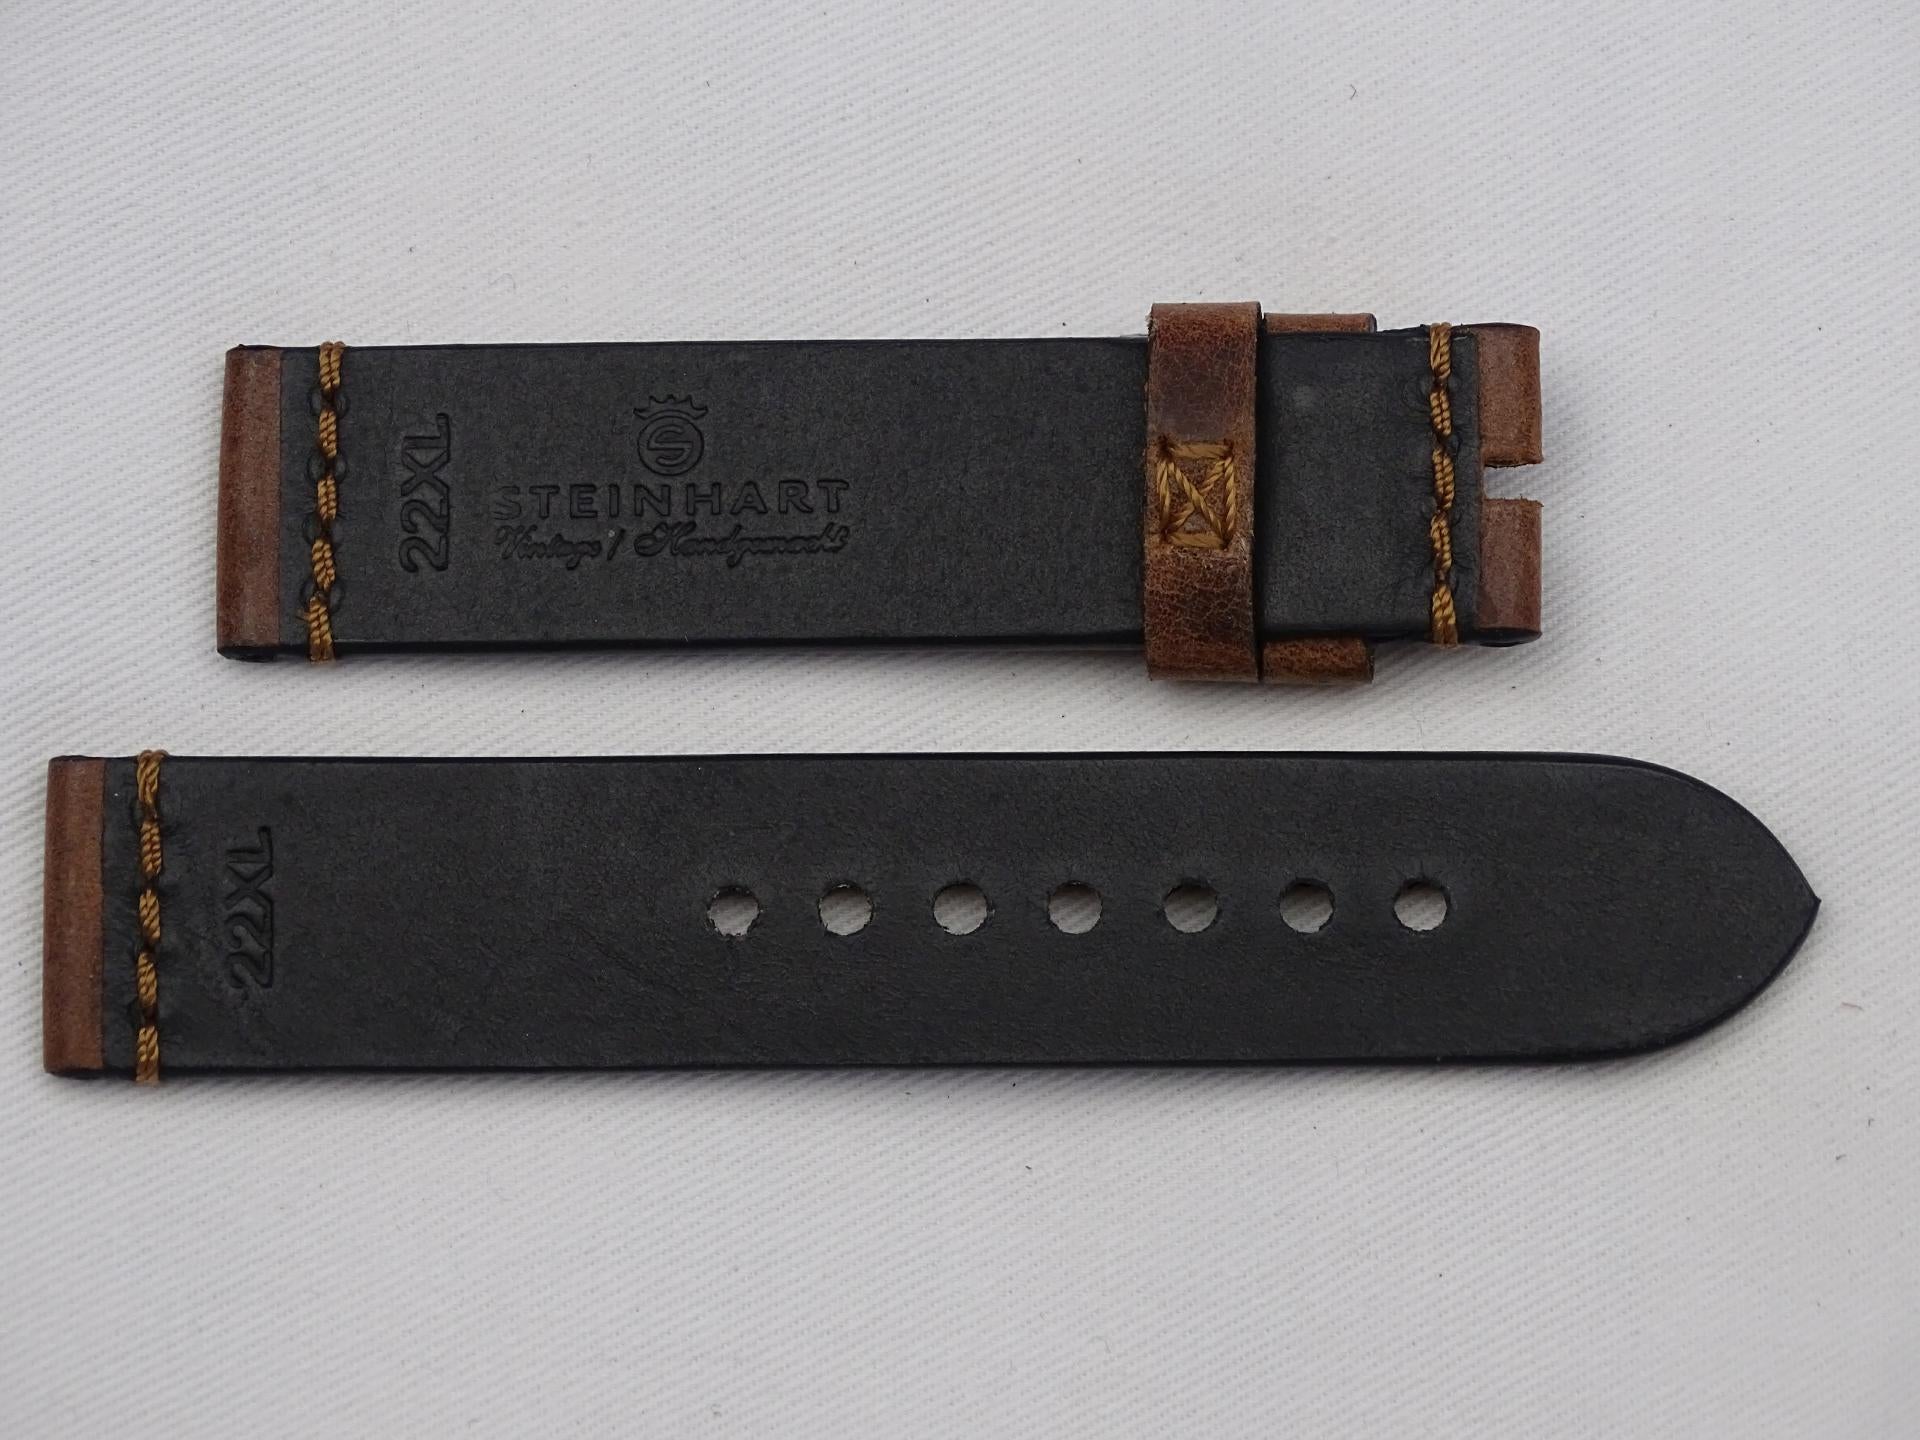 Leather Strap brown with bronce stitching